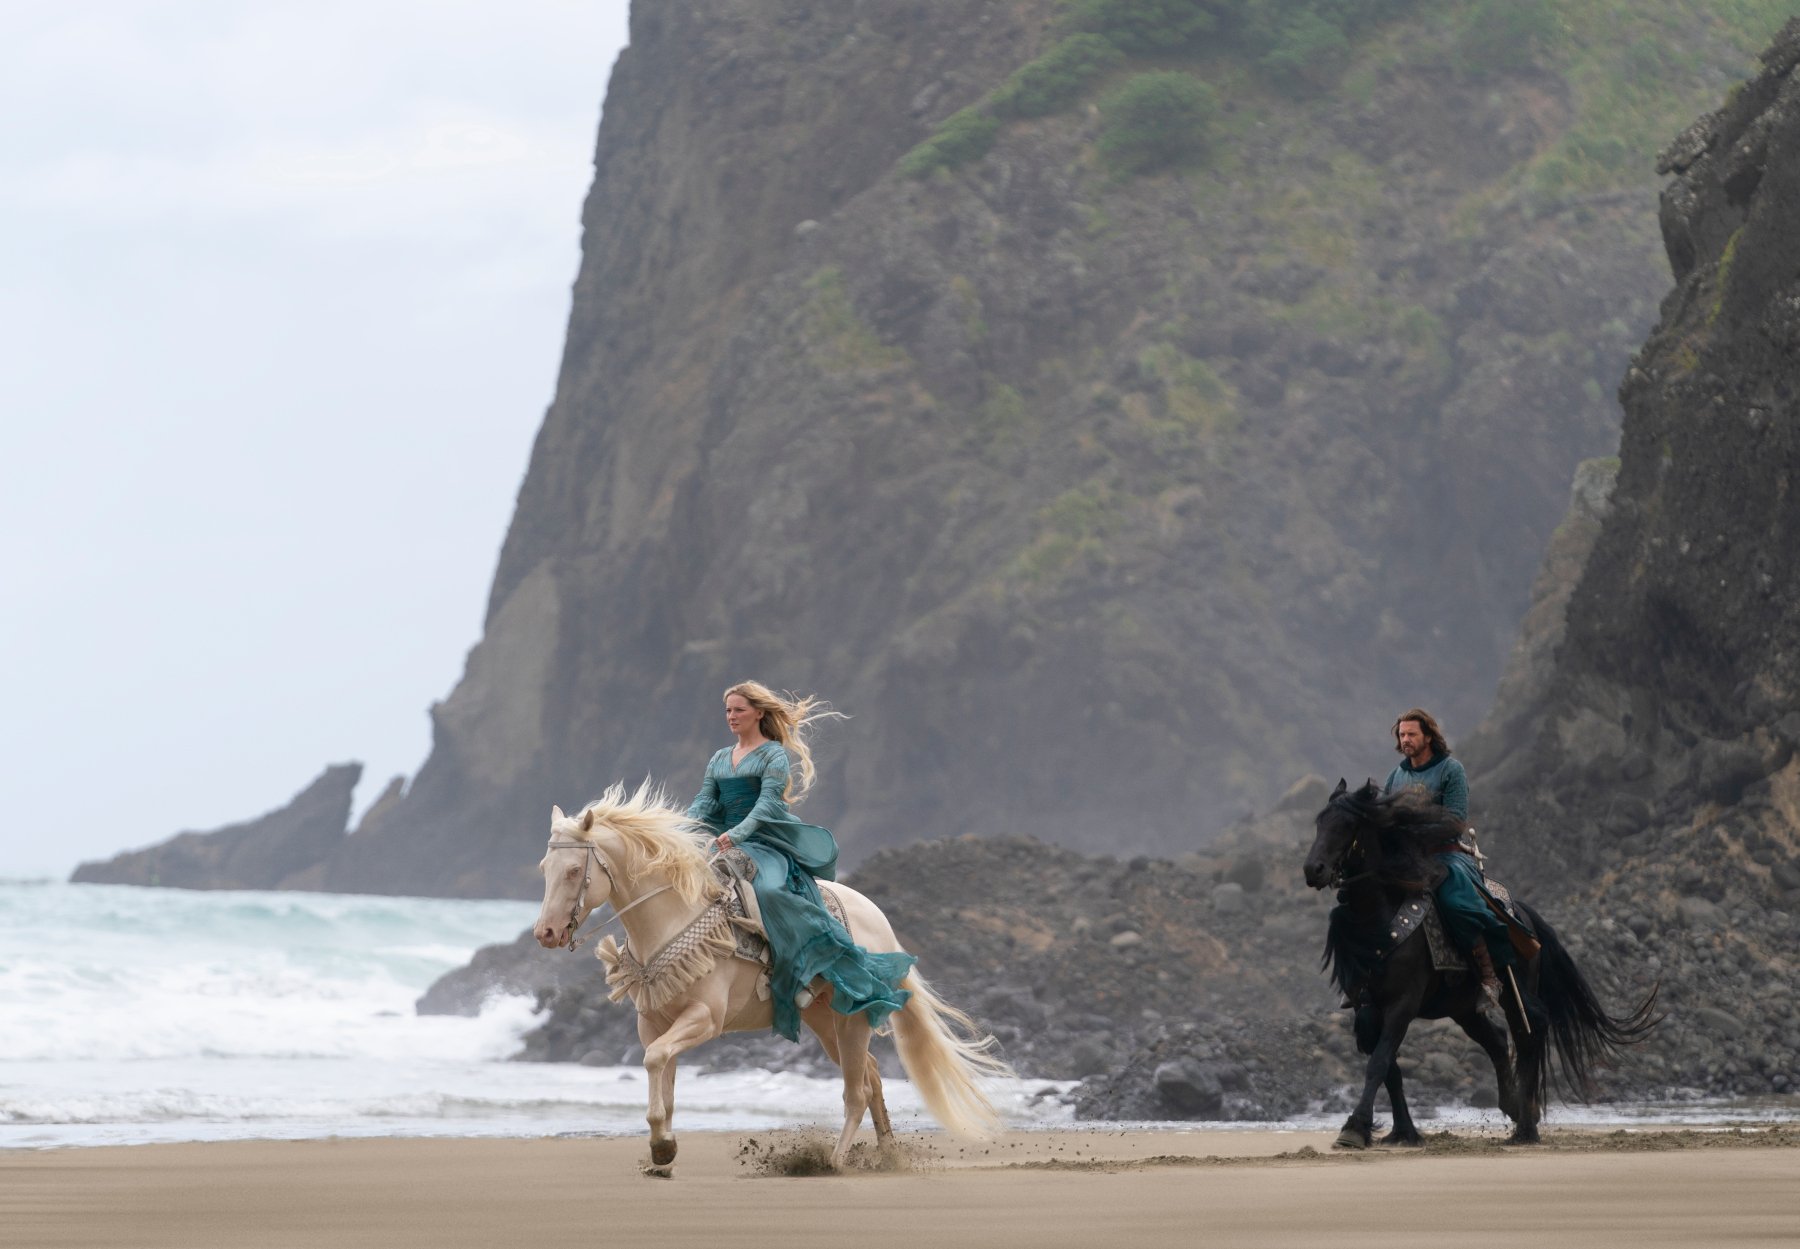 Morfydd Clark and Lloyd Owen as Galadriel and Elendil in 'The Lord of the Rings: The Rings of Power' for our article about the Netflix pitch for the rights to J.R.R. Tolkien's works. Both characters are riding horses across a beach.